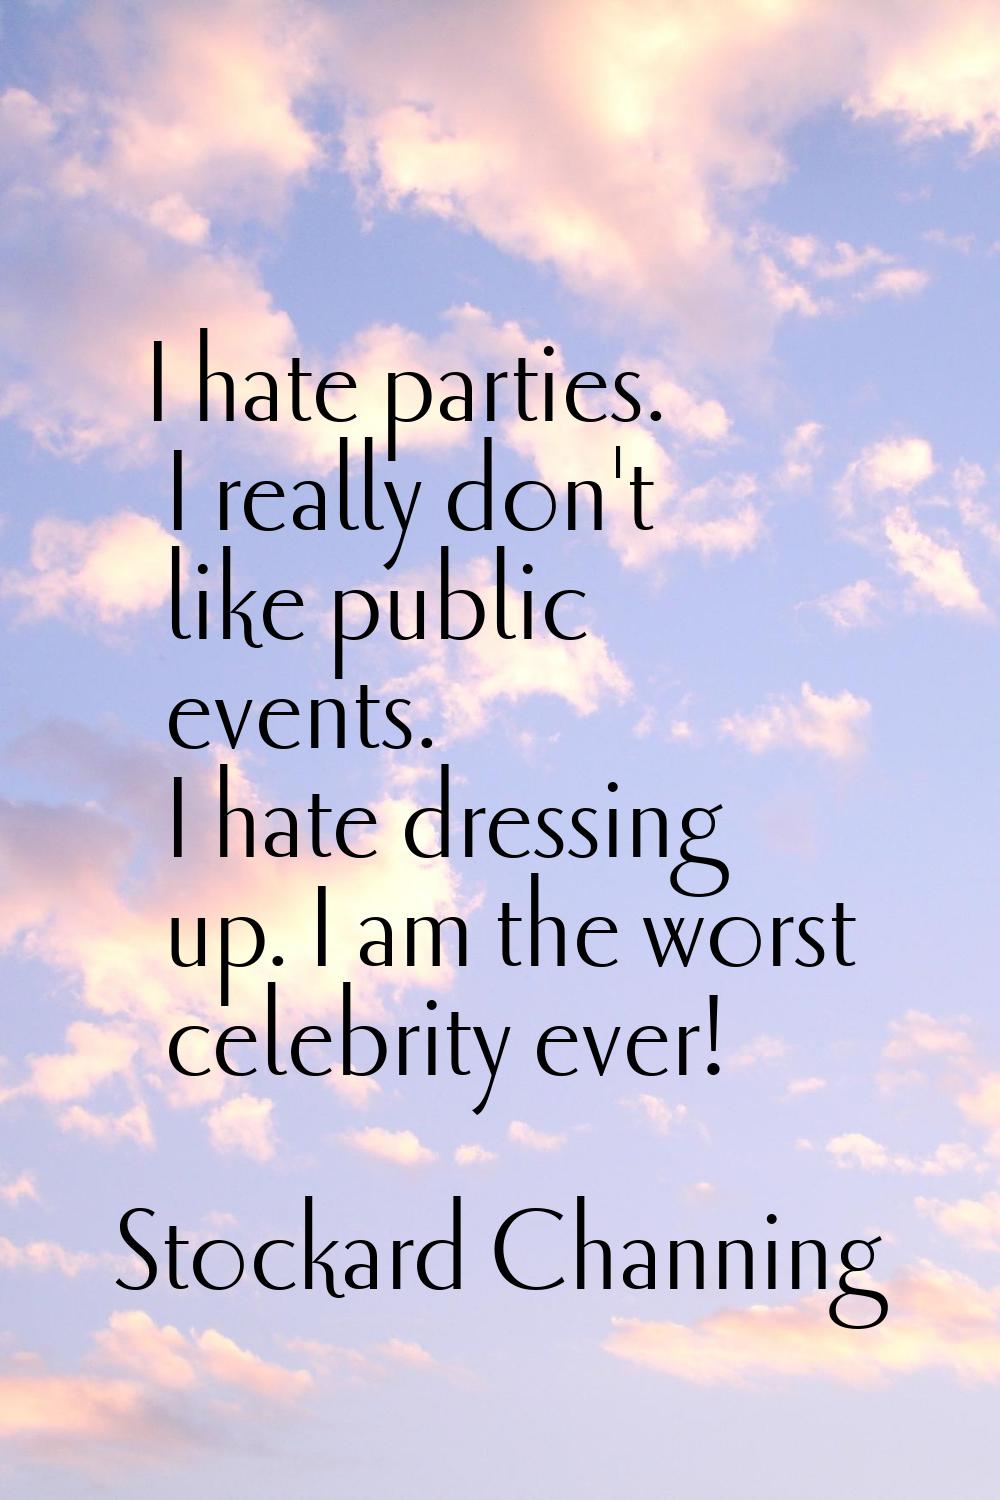 I hate parties. I really don't like public events. I hate dressing up. I am the worst celebrity eve